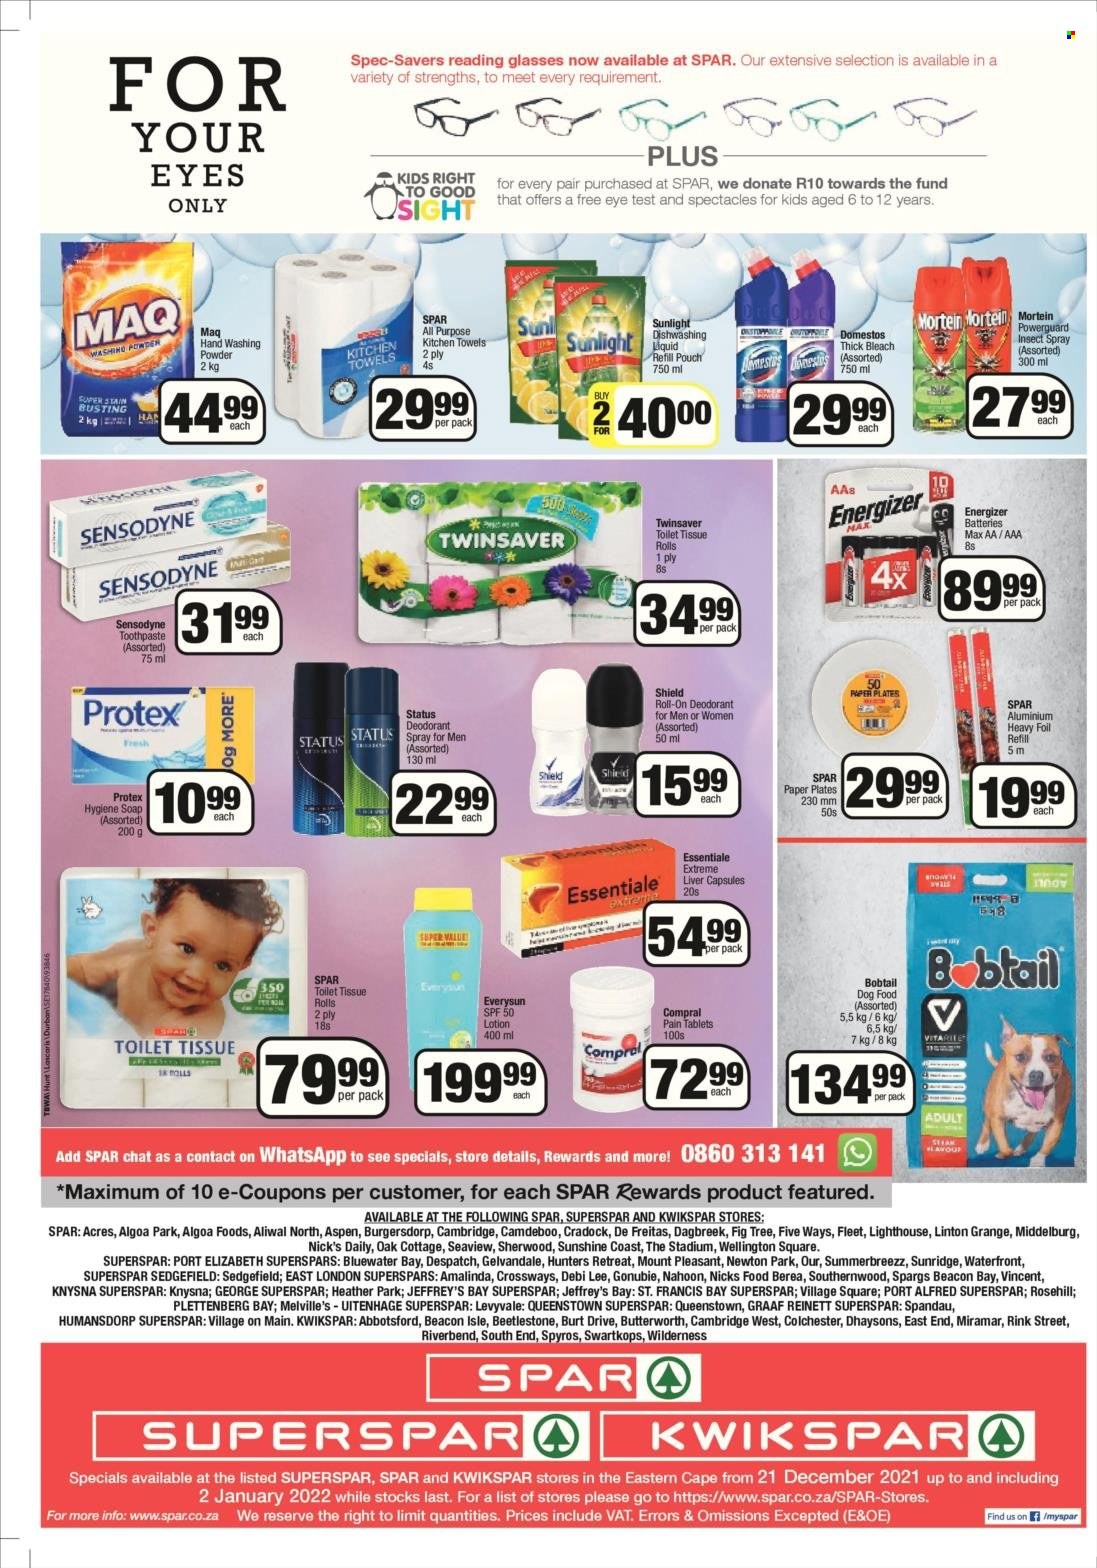 SPAR catalogue  - 21/12/2021 - 02/01/2022 - Sales products - Sunshine, steak, toilet paper, kitchen towels, Domestos, bleach, Mortein, thick bleach, laundry powder, Sunlight, Protex, soap, toothpaste, Sensodyne, body lotion, anti-perspirant, roll-on, deodorant, paper plate, animal food, dog food, Essentiale Extreme. Page 4.